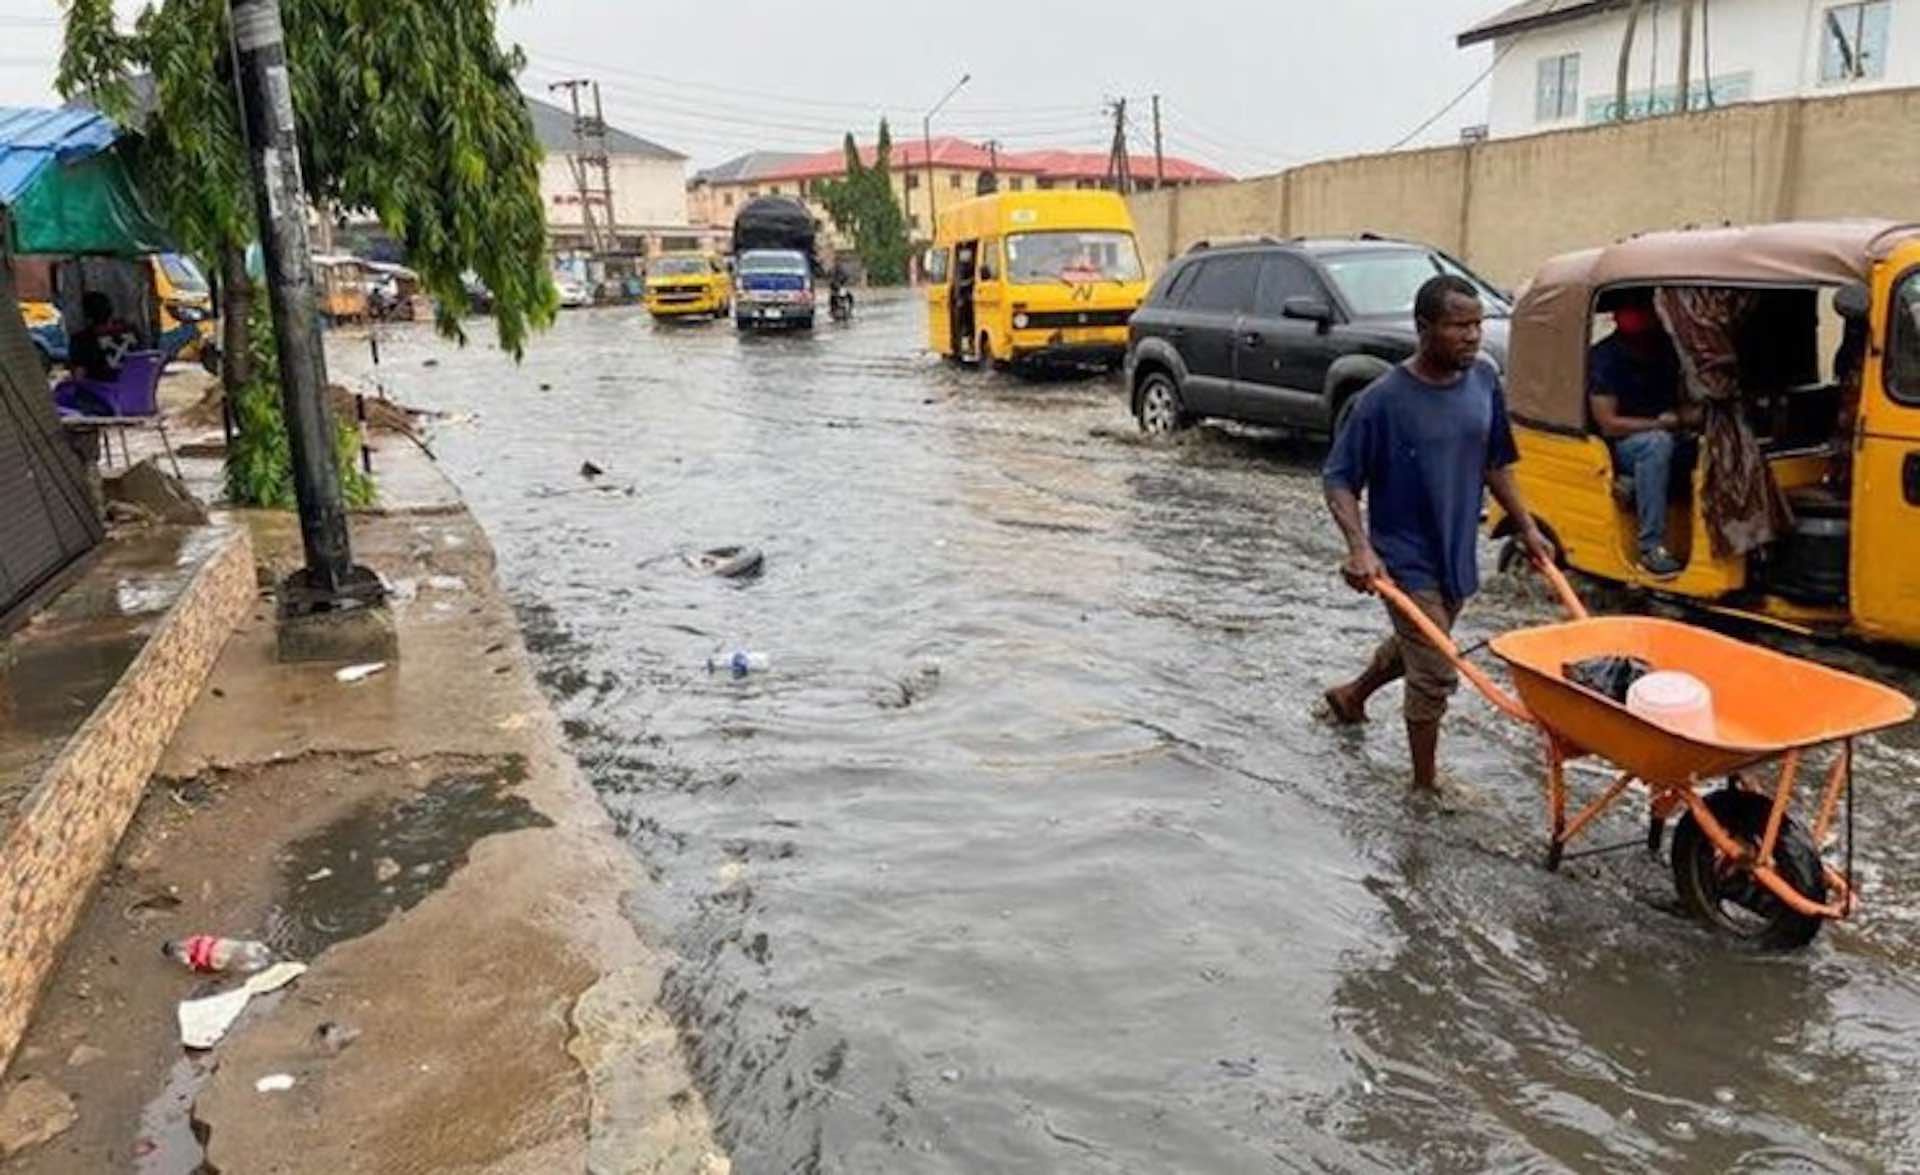 Over 300 Nigerians have died in floods this year